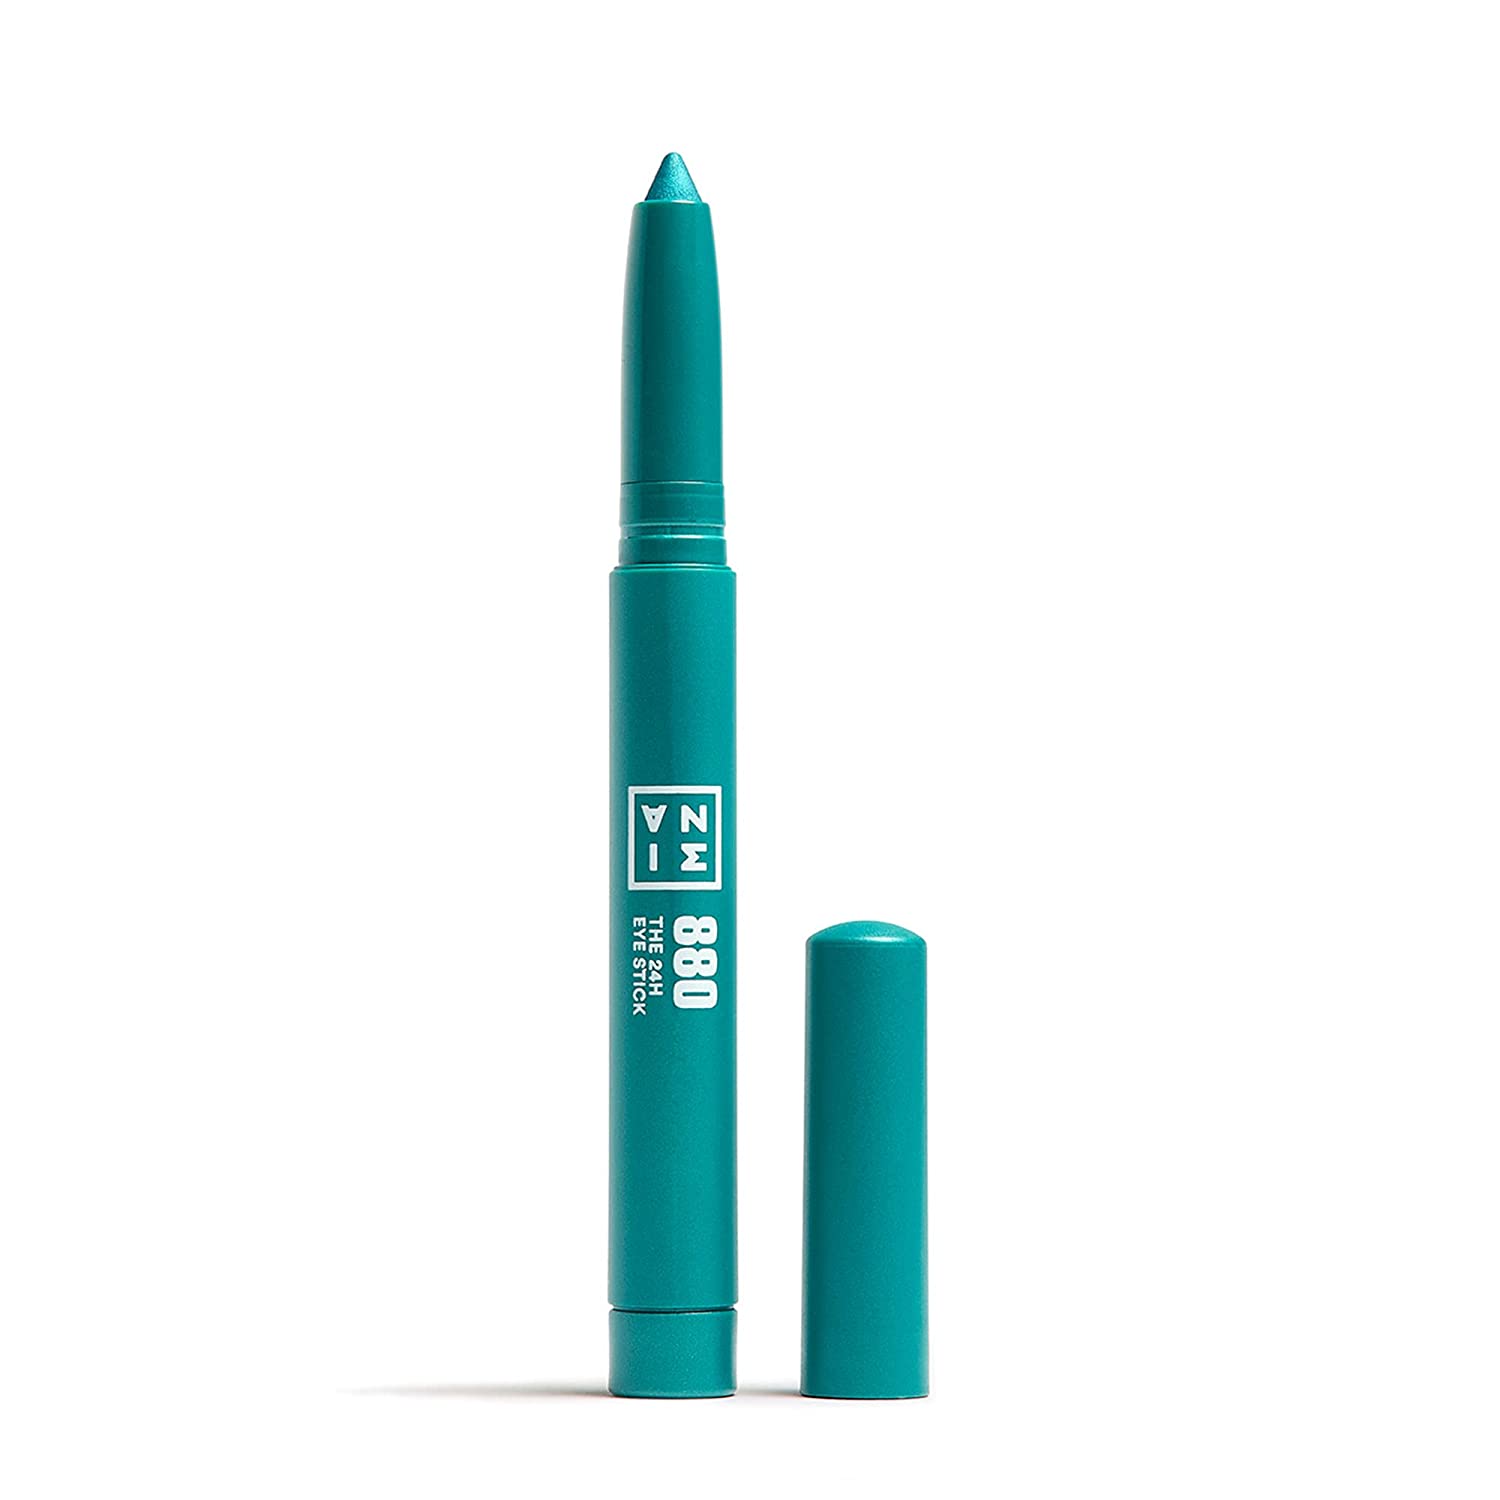 3INA MAKEUP - Vegan - Cruelty Free - The 24H Eye Stick 880 - Turquoise - 24H Waterproof Formula - Creamy Texture - Eyeshadow Pen - Highly Pigmented - Quick Drying - Matte Shimmer Metalic, ‎turquoise